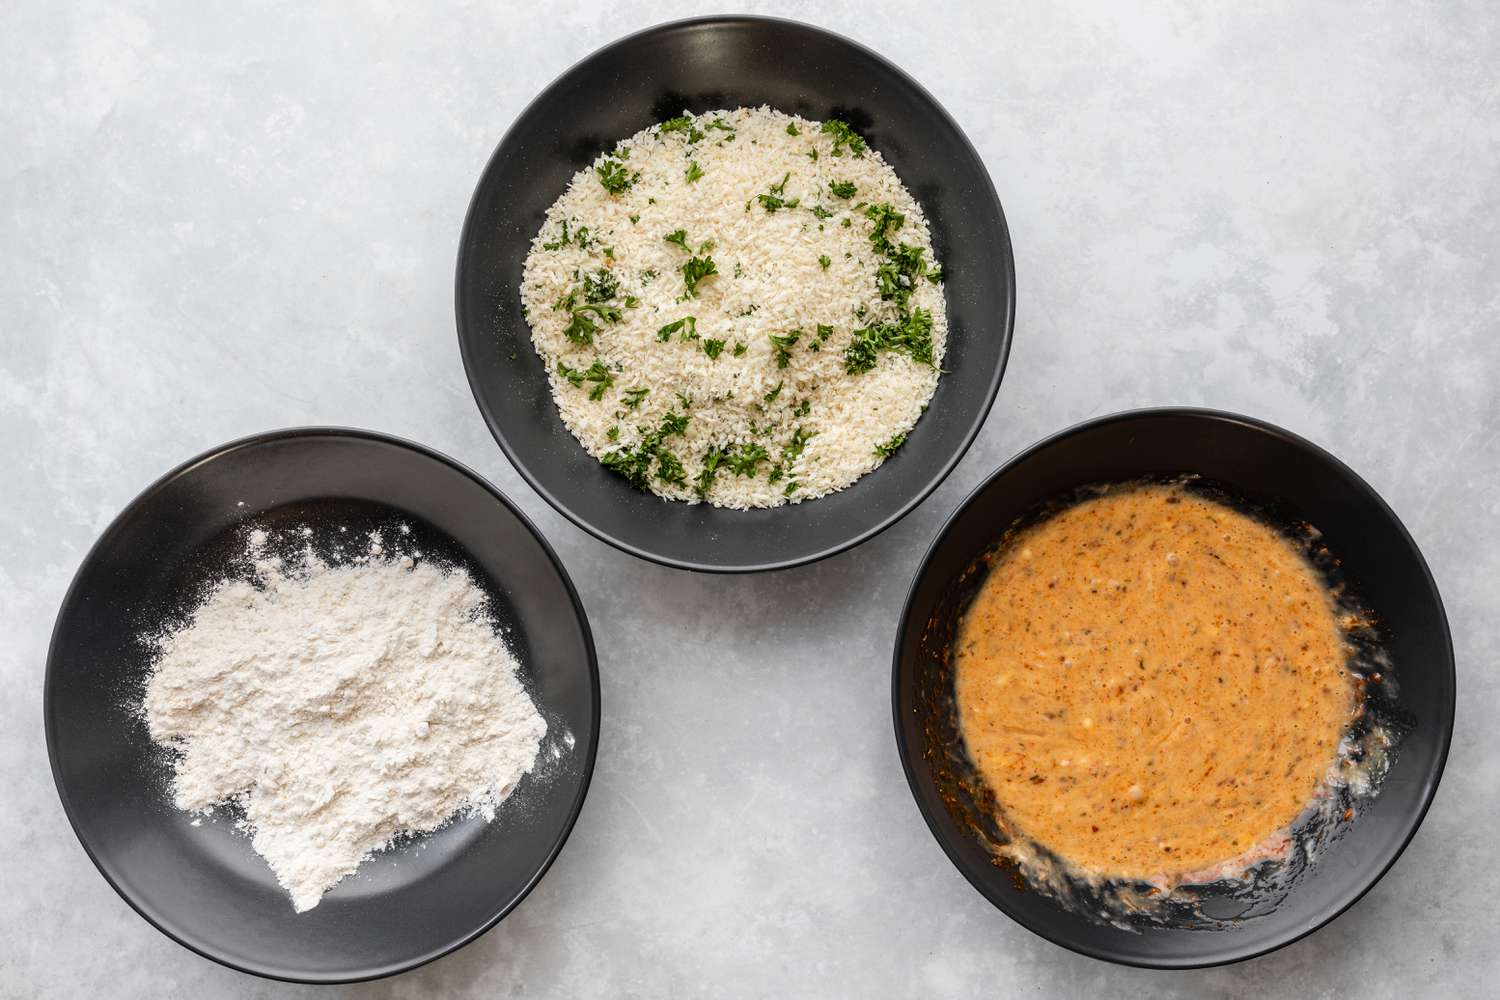 Bowls of flour, panko, and egg mixtures for haddock